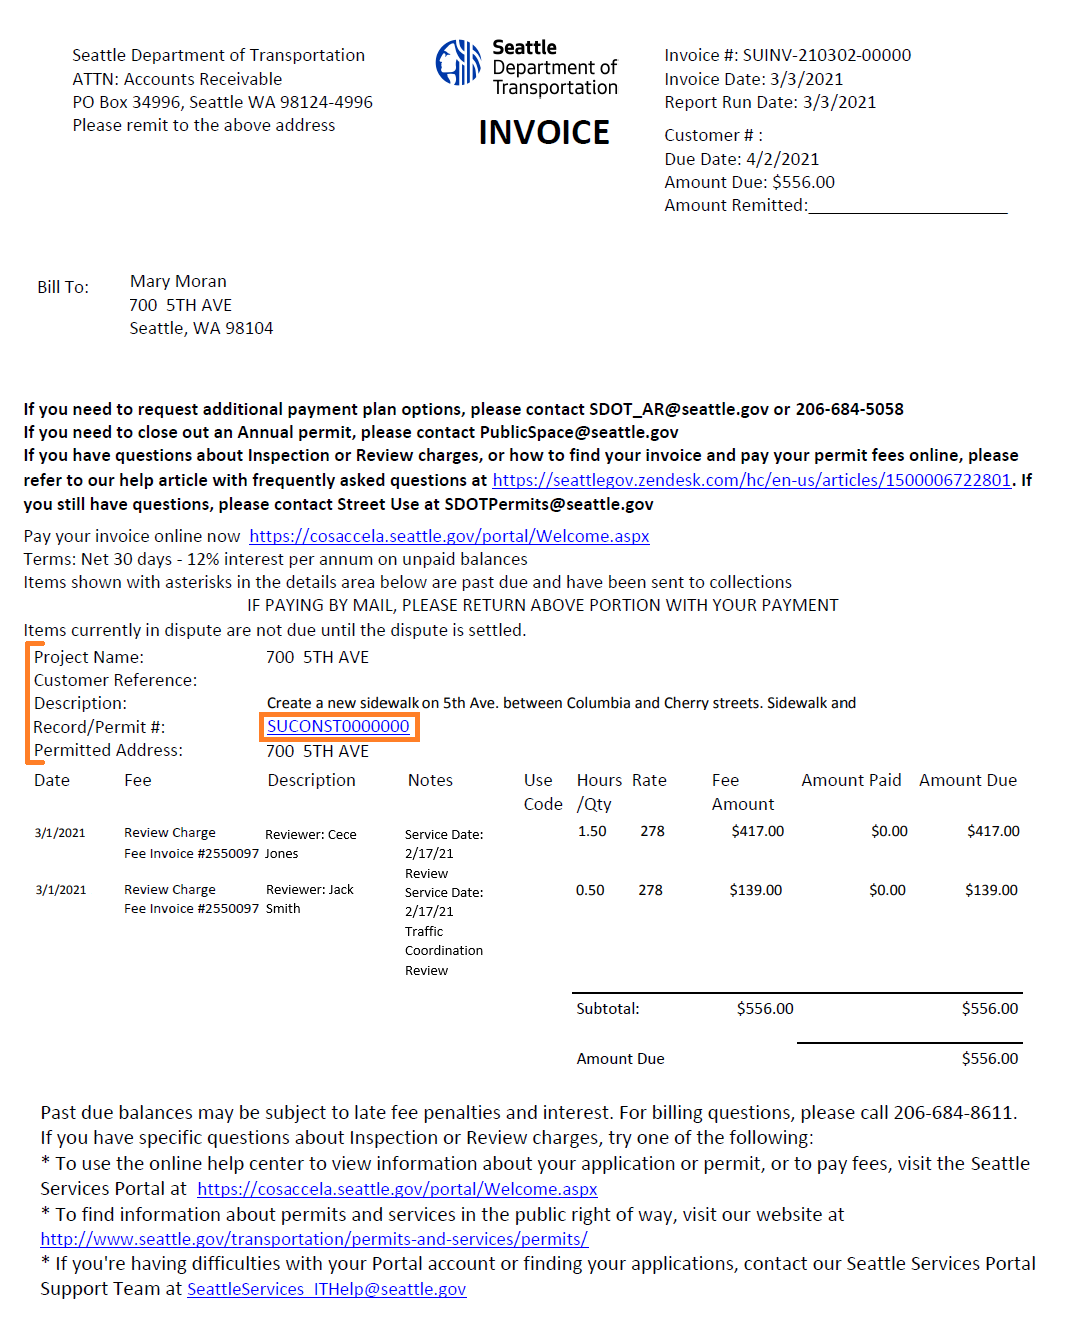 Invoice_Document_with_Project_Section_Highlighted.png